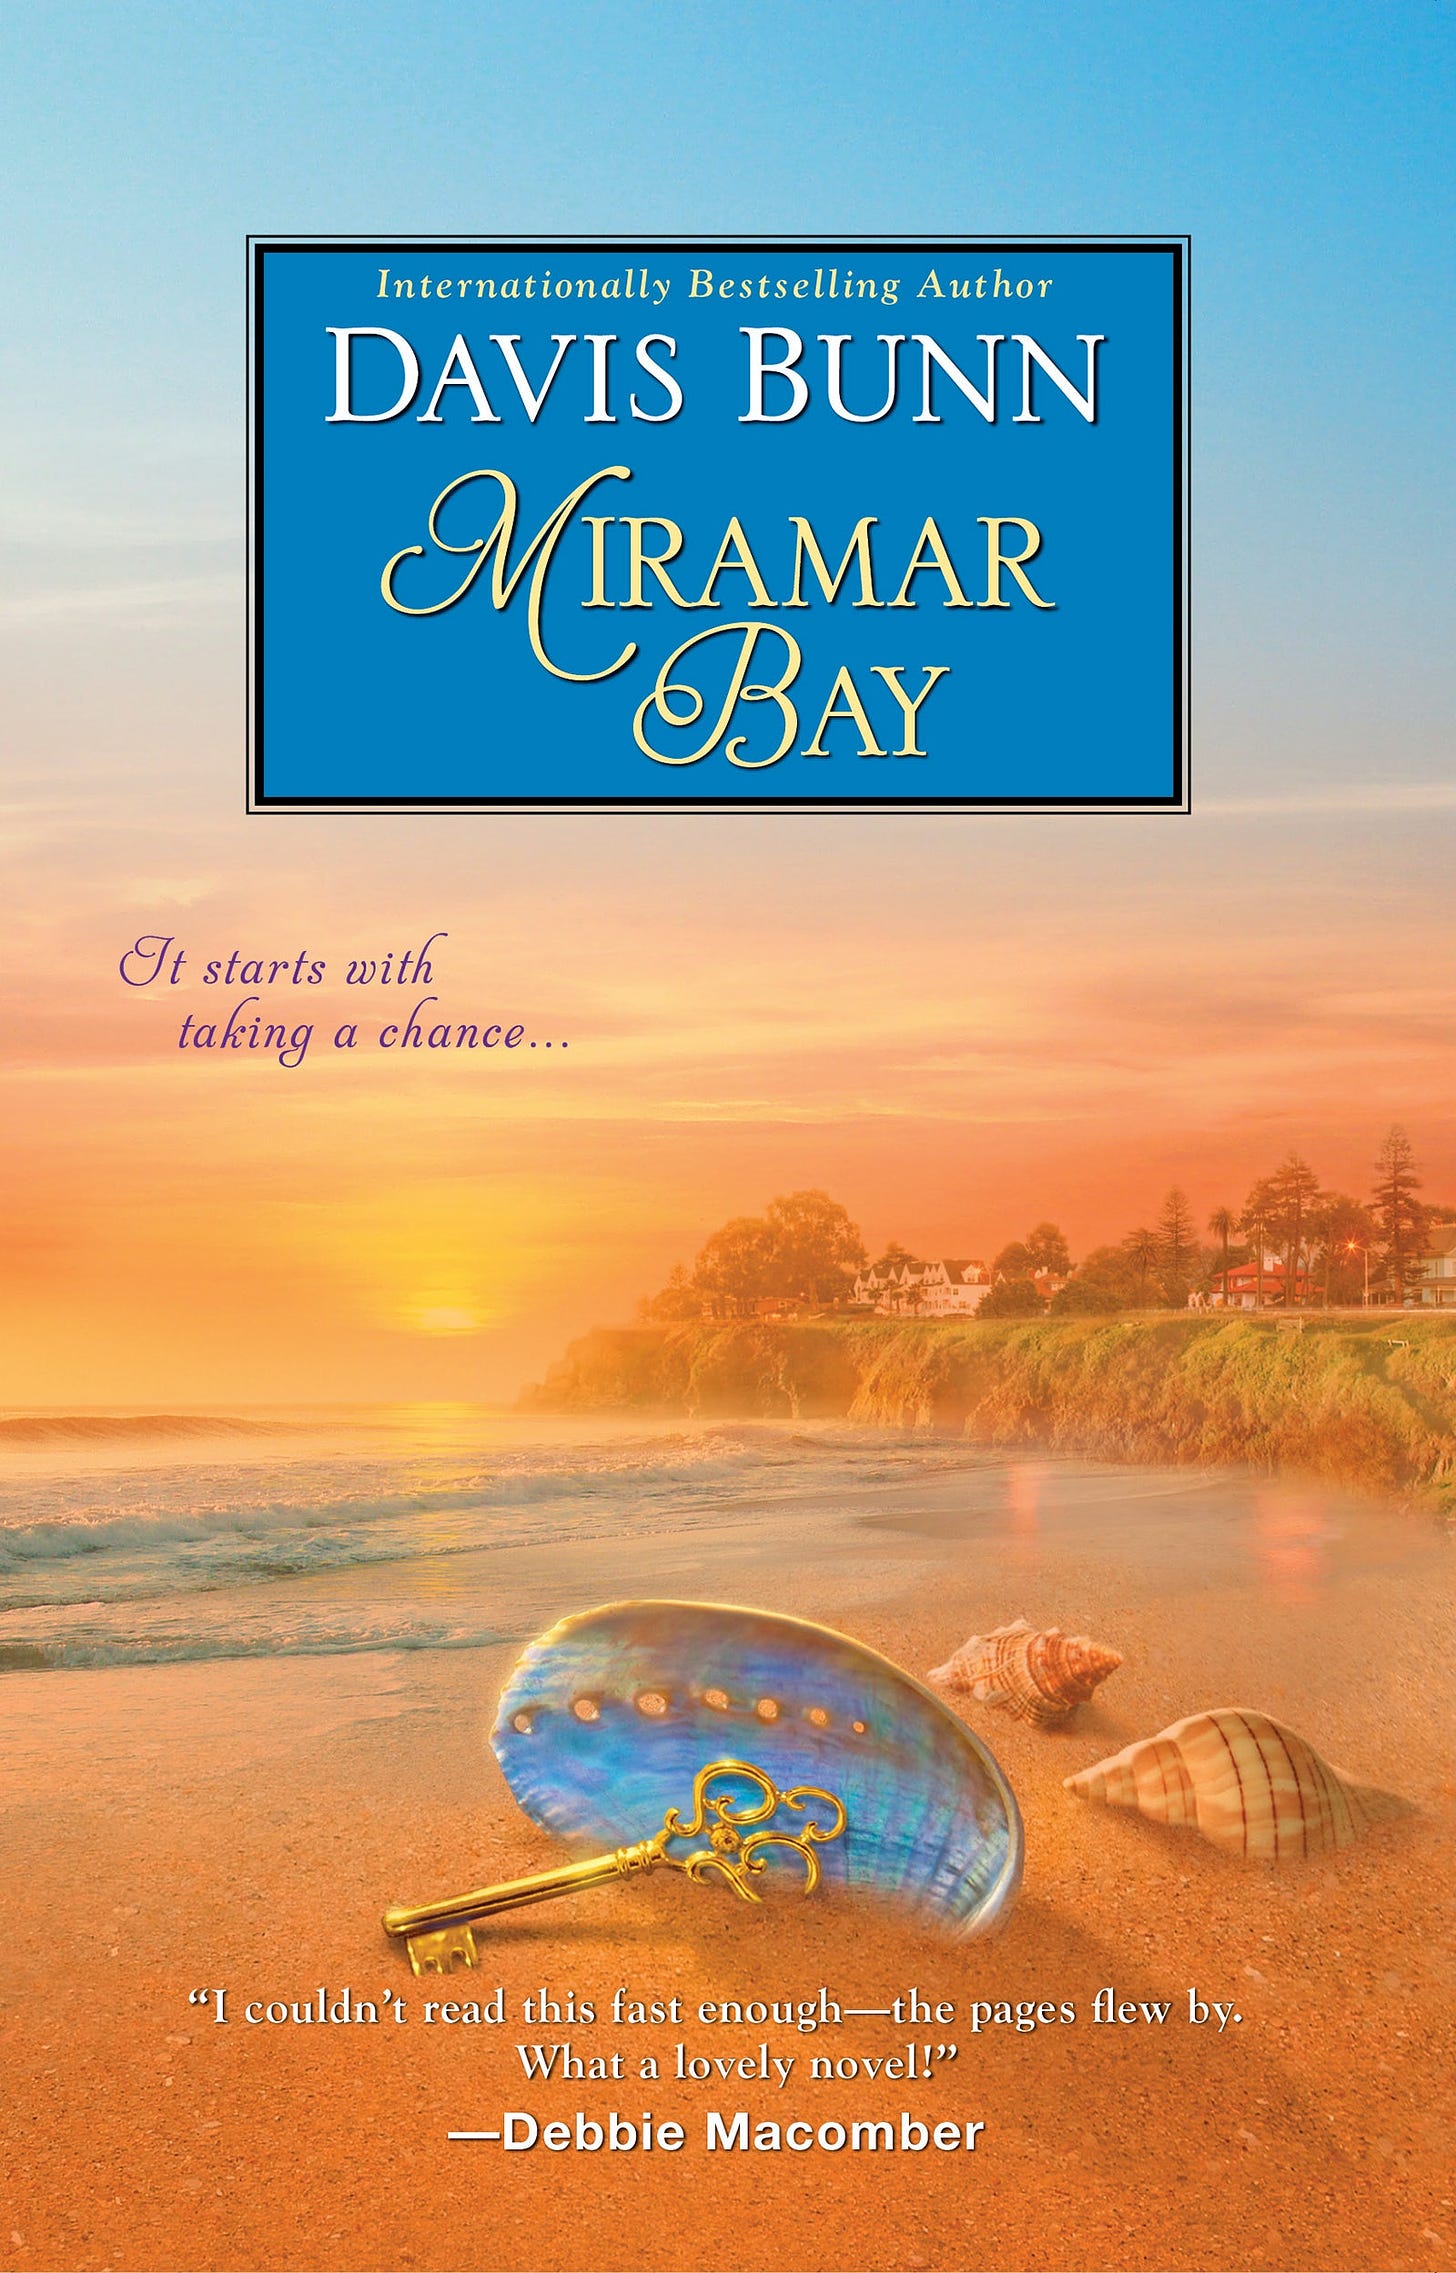 Book cover shows the seaside at sunset, with a seashell beside a golden key on the shore